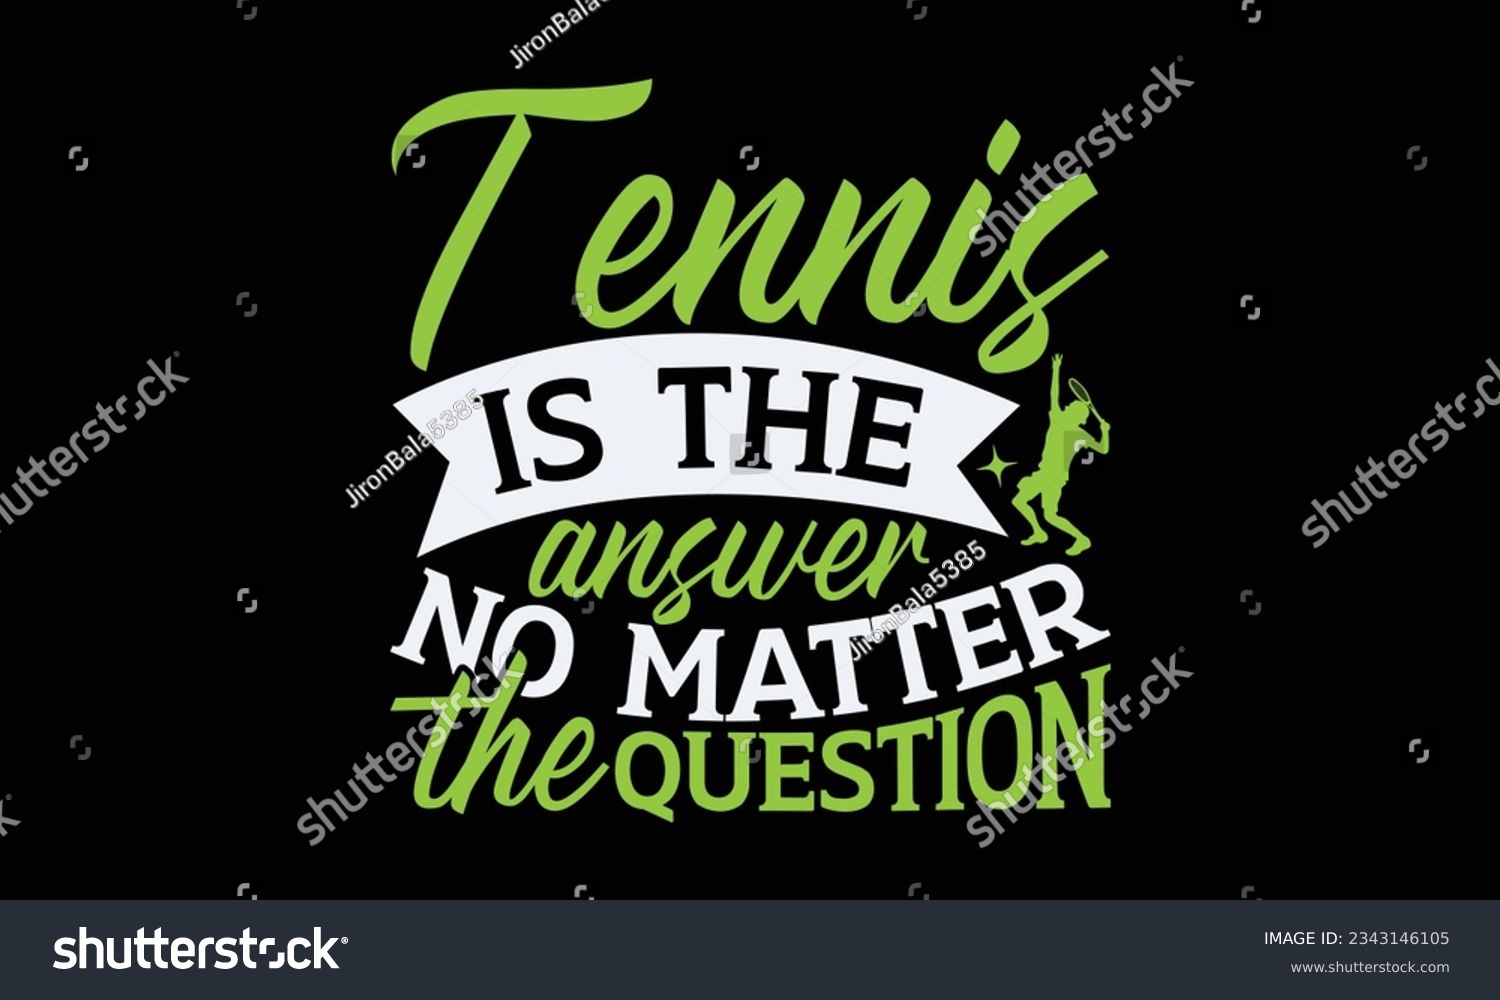 SVG of Tennis is the answer no matter the question - Tennis t-shirt design, Hand drawn lettering phrase, Illustration for prints on SVG , bags, posters, template, cards and Mug. svg